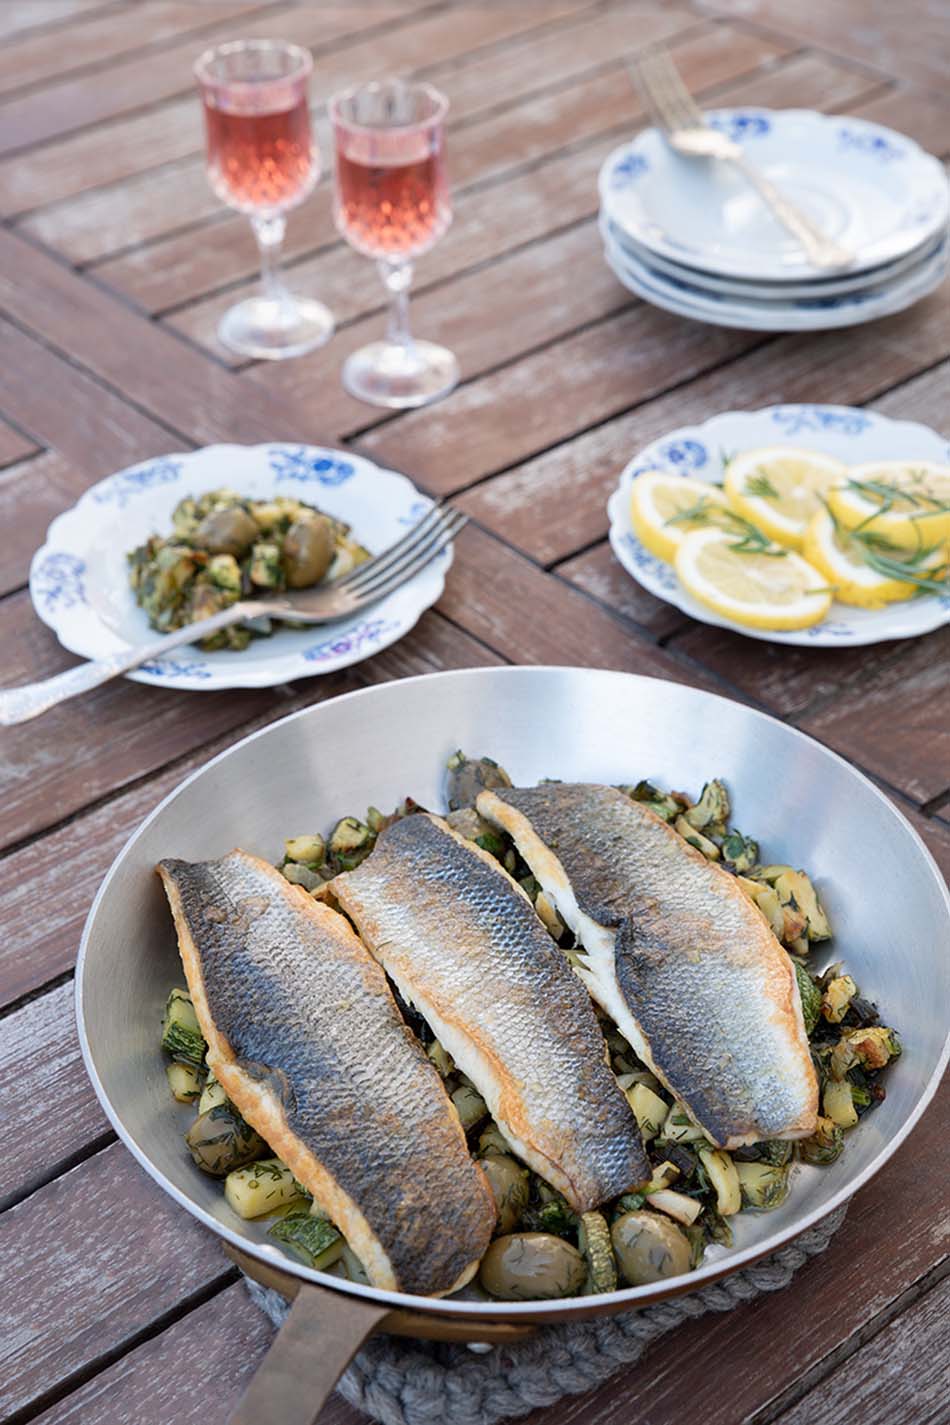 Sea - bass with zucchini and olives